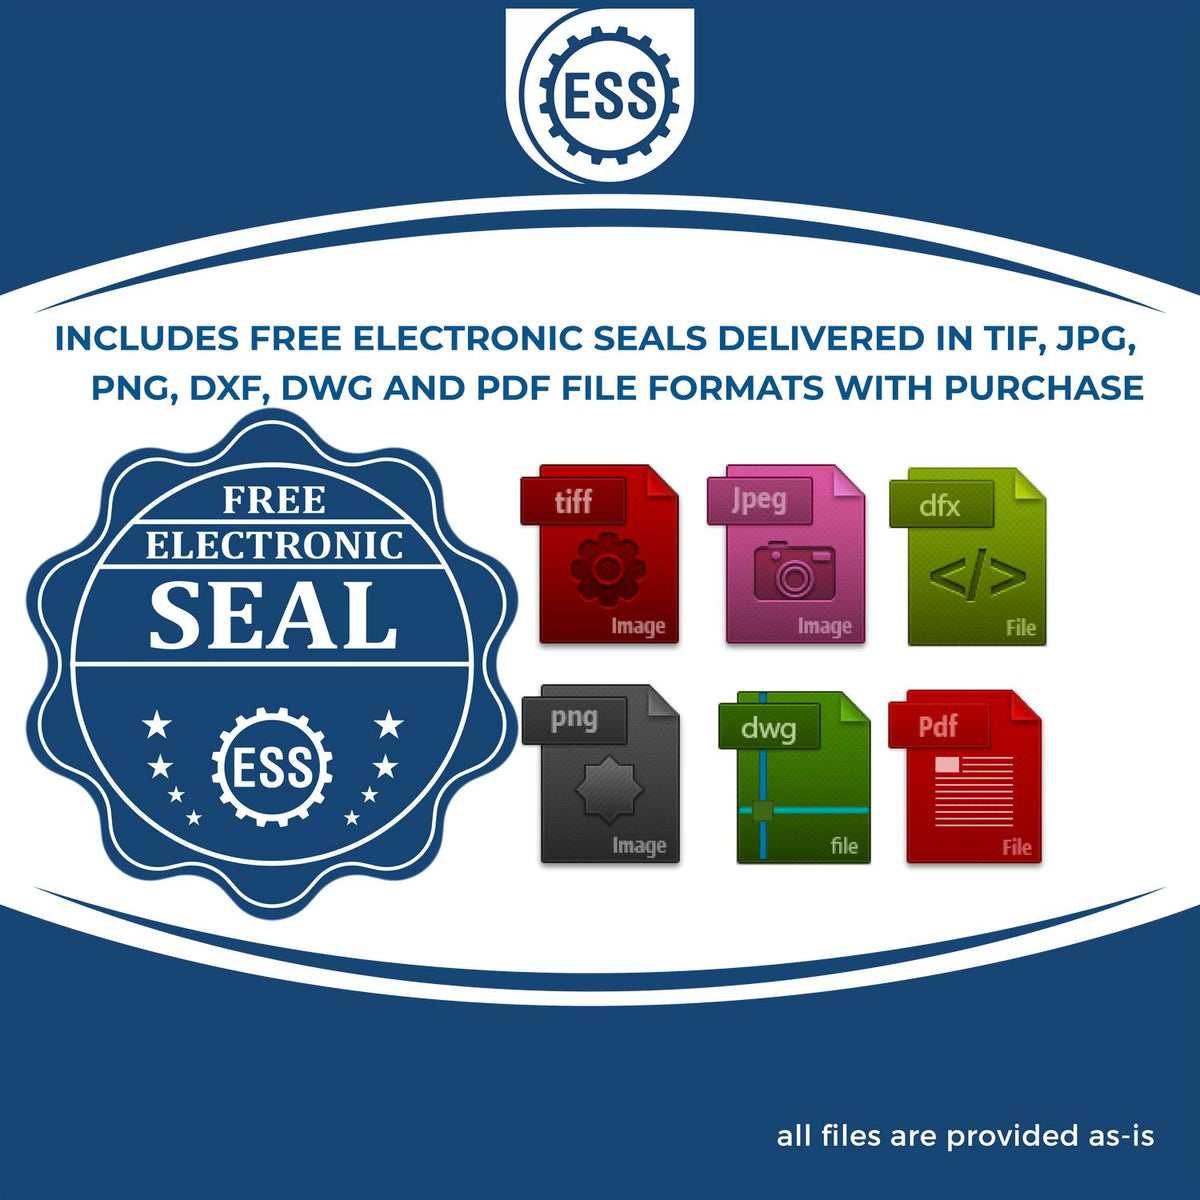 An infographic for the free electronic seal for the Heavy Duty Cast Iron South Dakota Engineer Seal Embosser illustrating the different file type icons such as DXF, DWG, TIF, JPG and PNG.